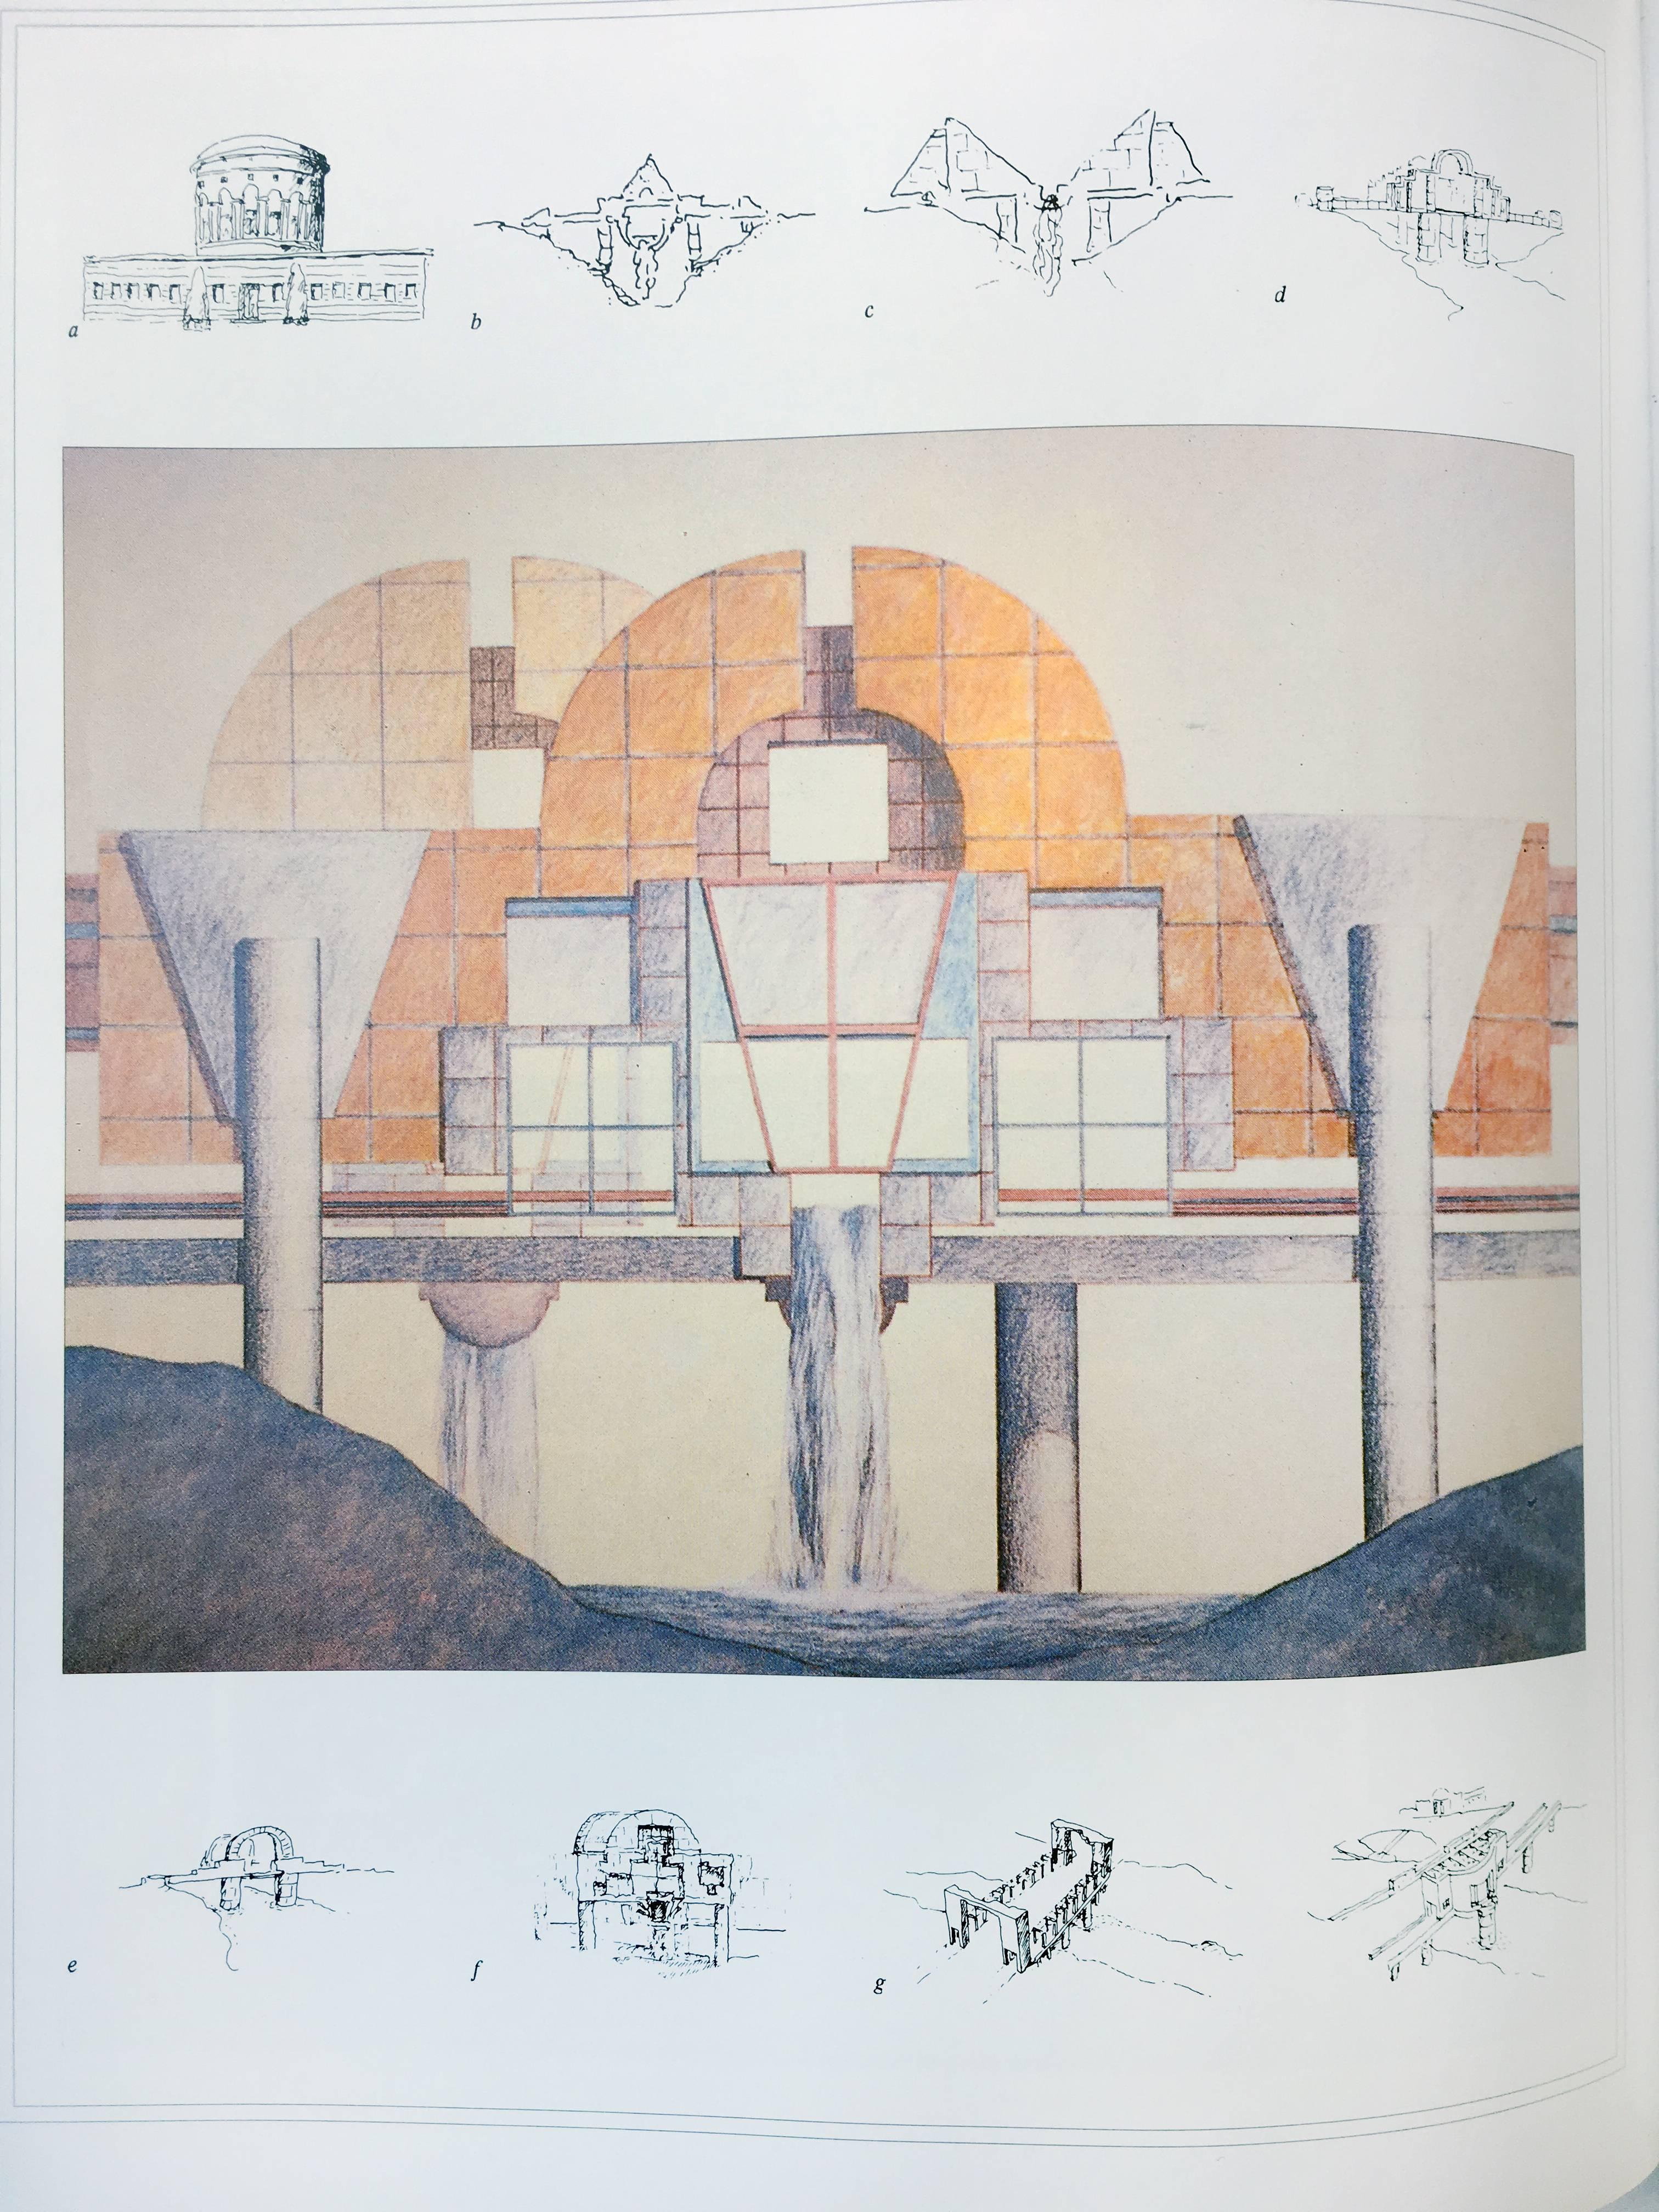 Late 20th Century The New Moderns: From Late to Neo-Modernism - Charles Jencks - Academy, 1990